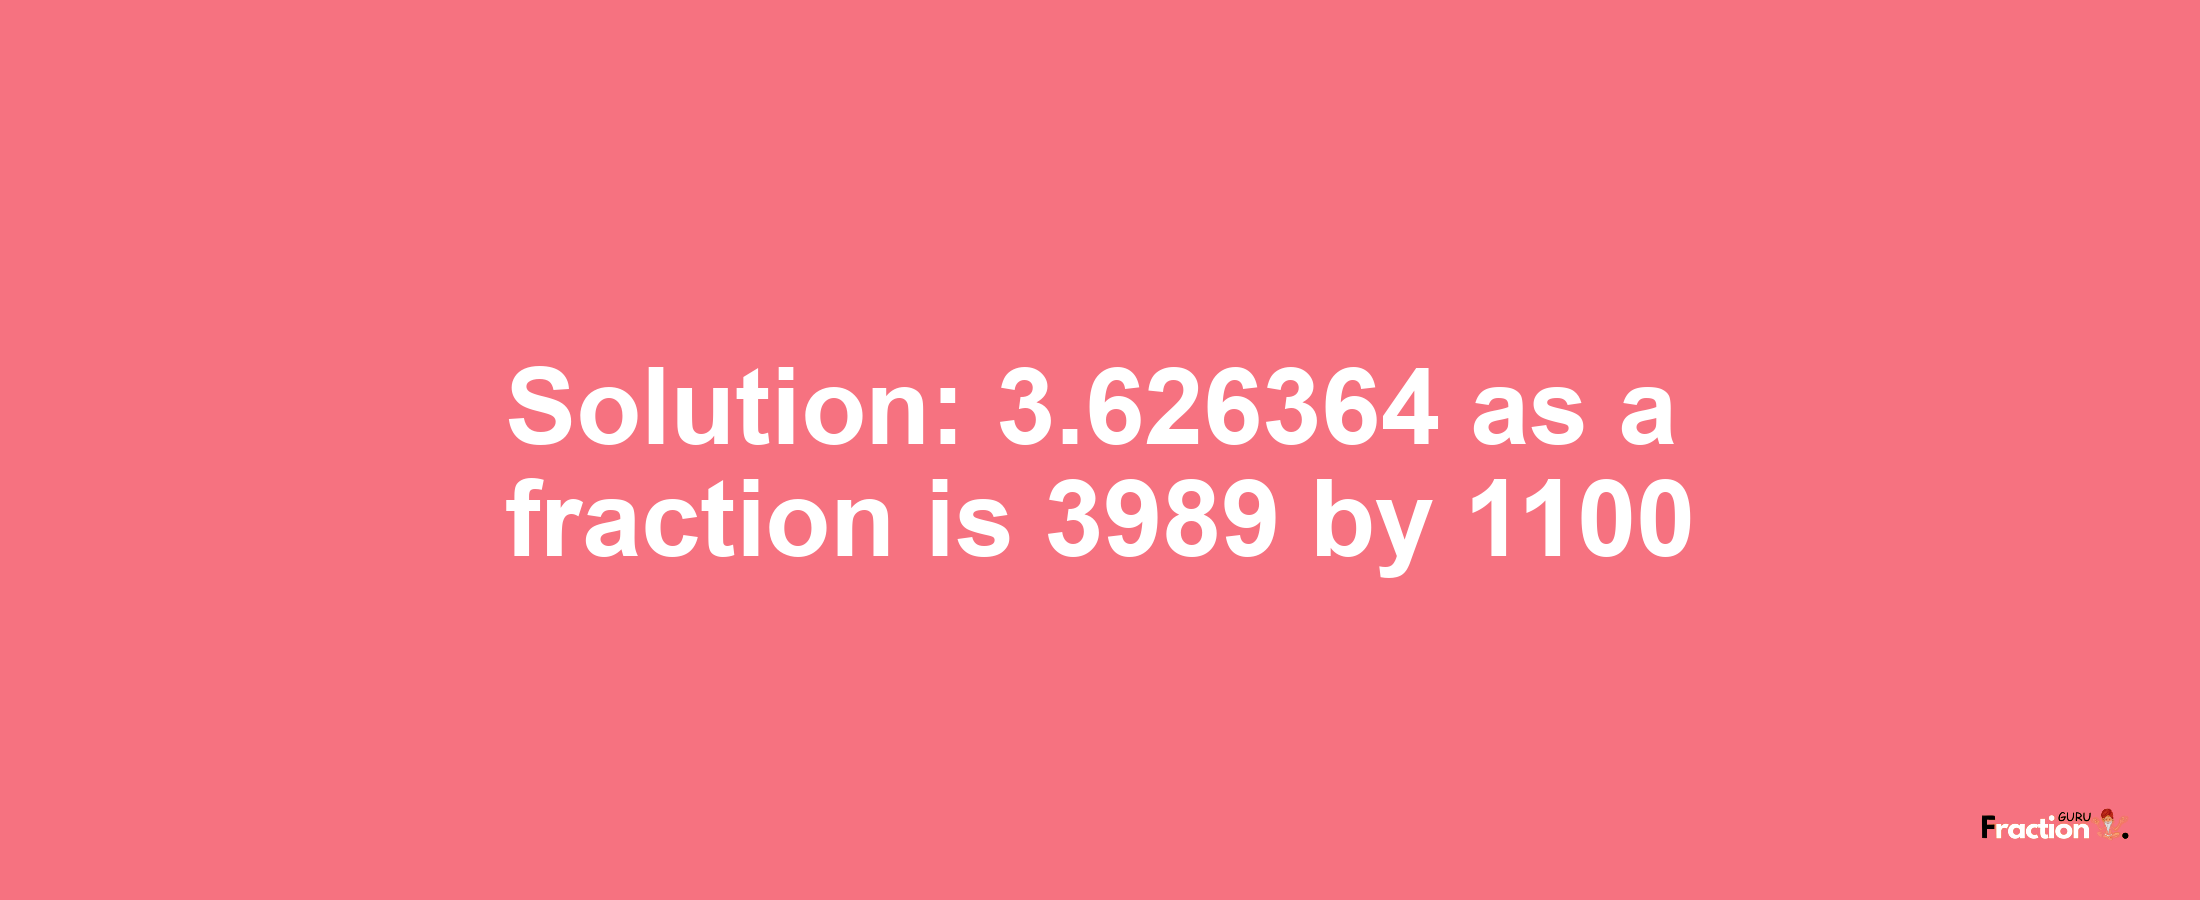 Solution:3.626364 as a fraction is 3989/1100